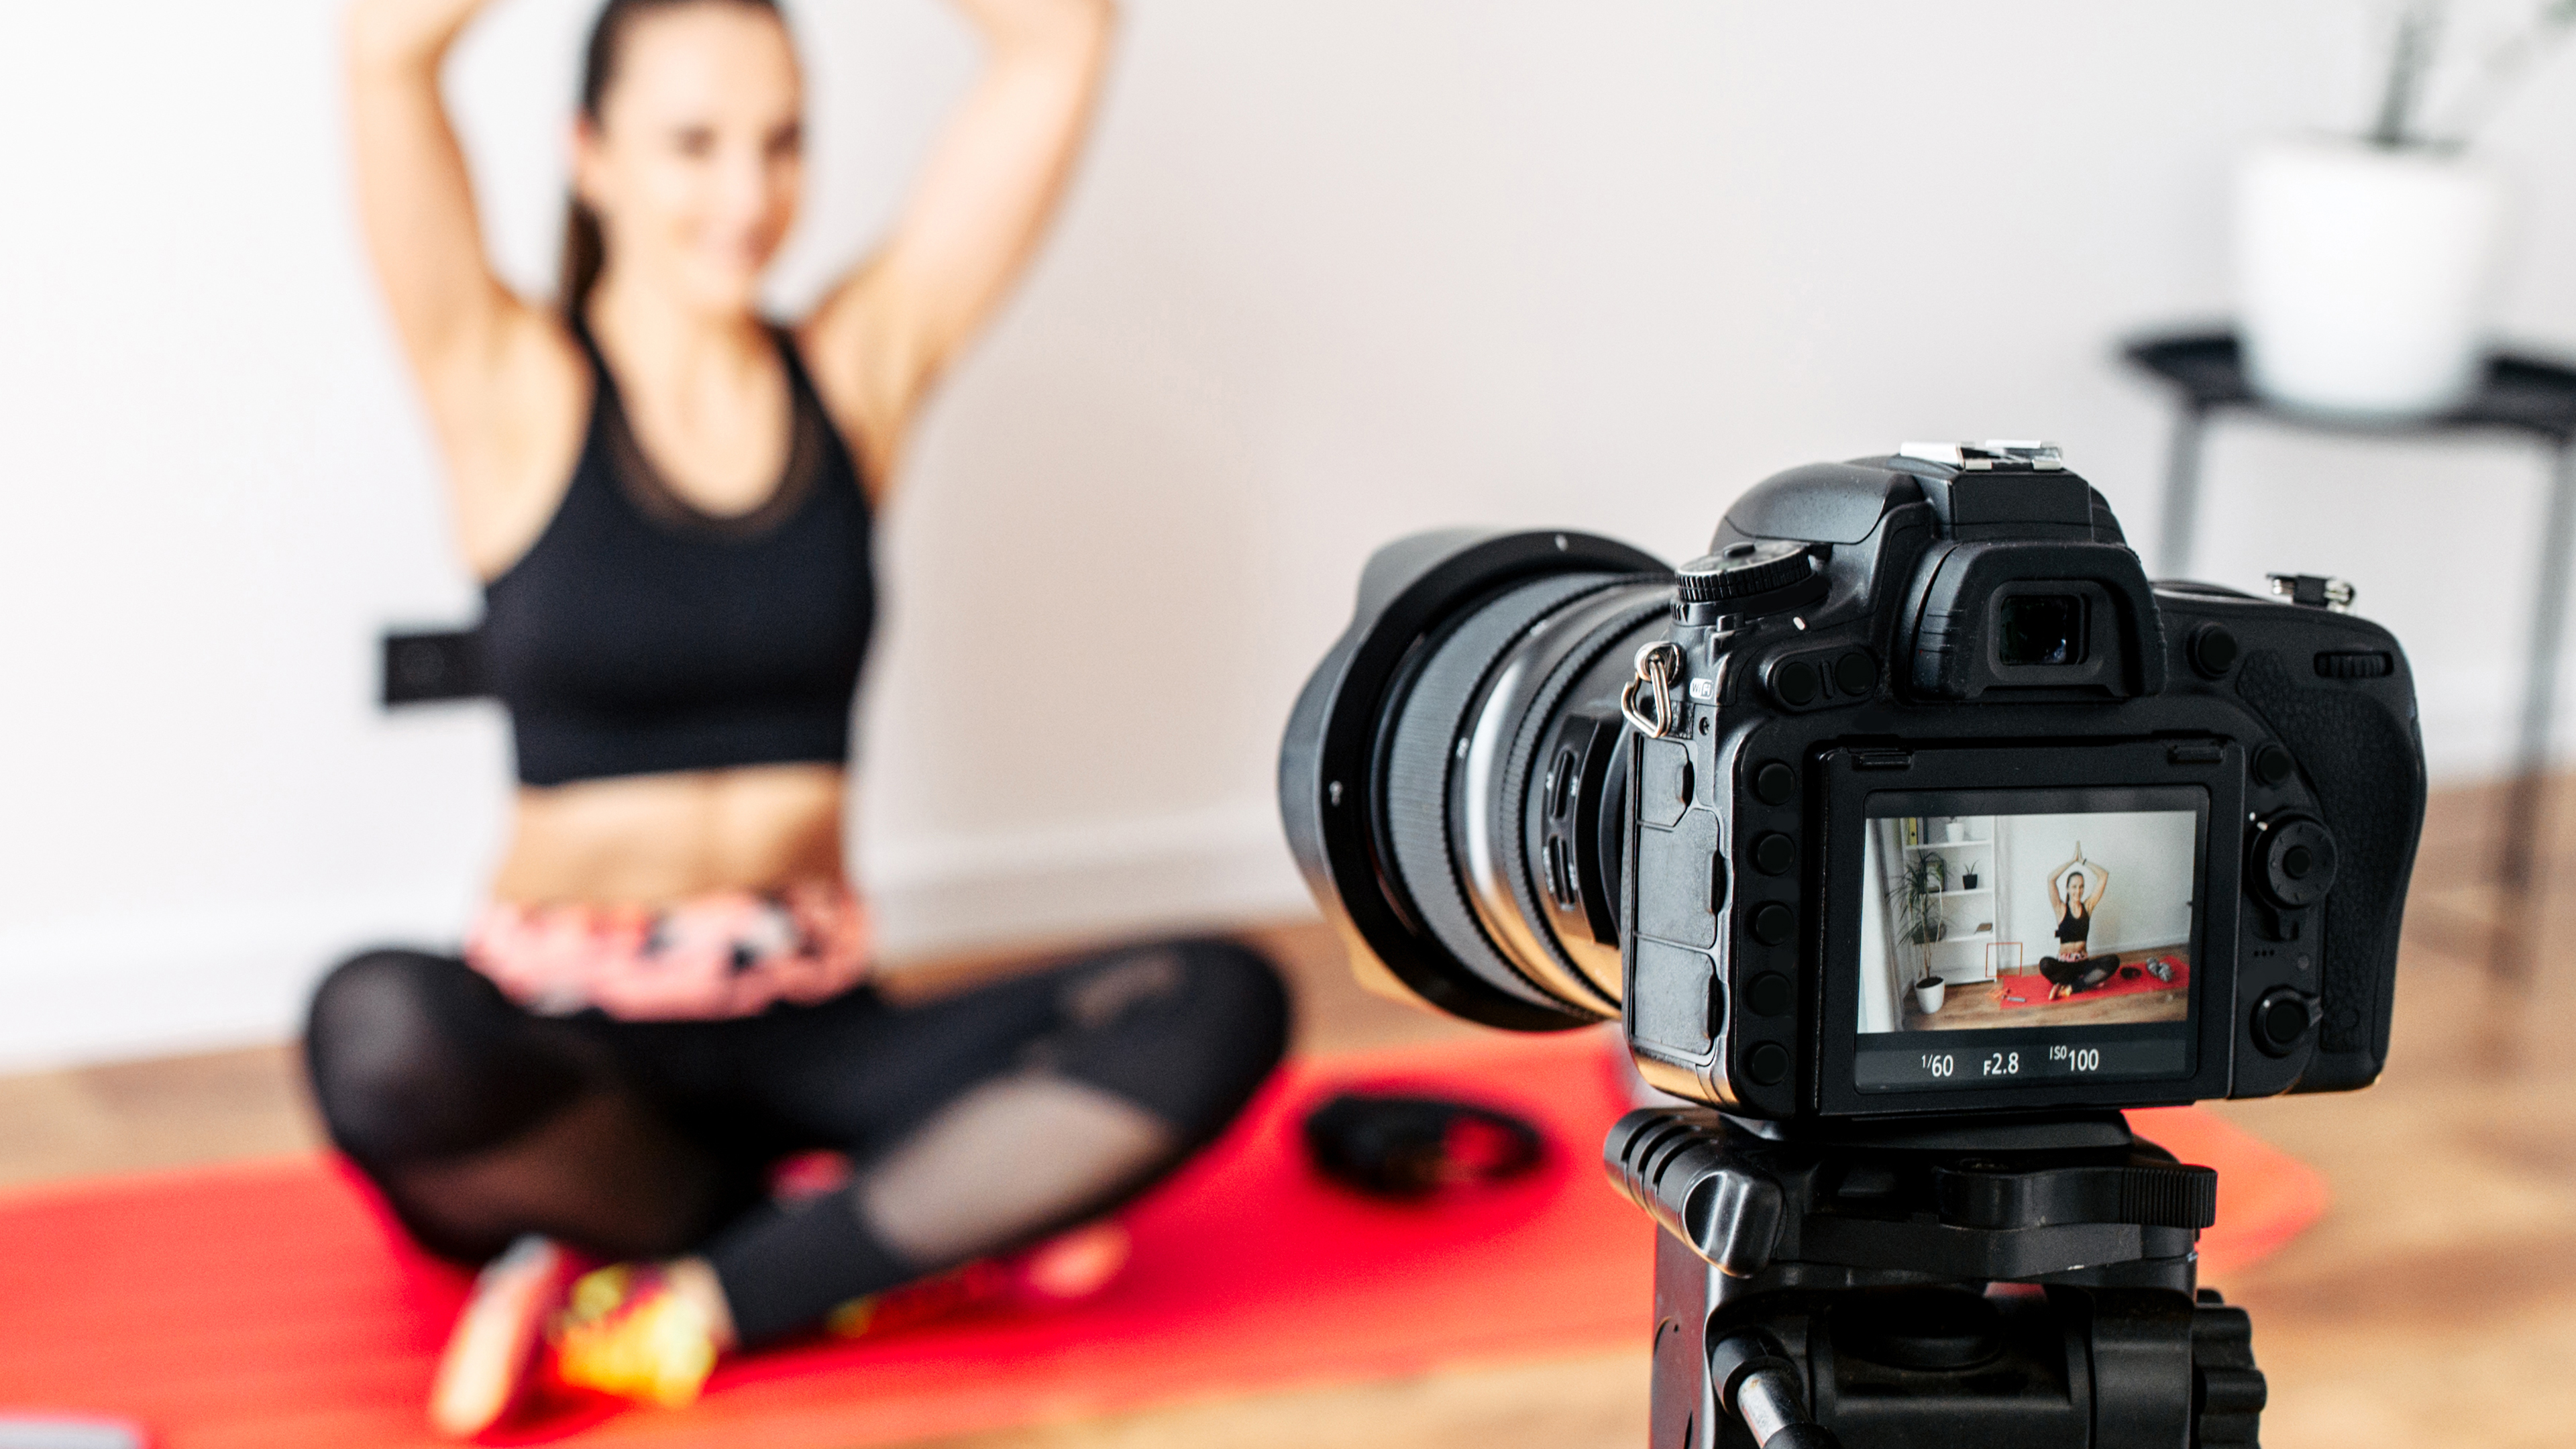 How to Price Your Live Stream Classes and On-demand Videos During the Coronavirus Mindbody